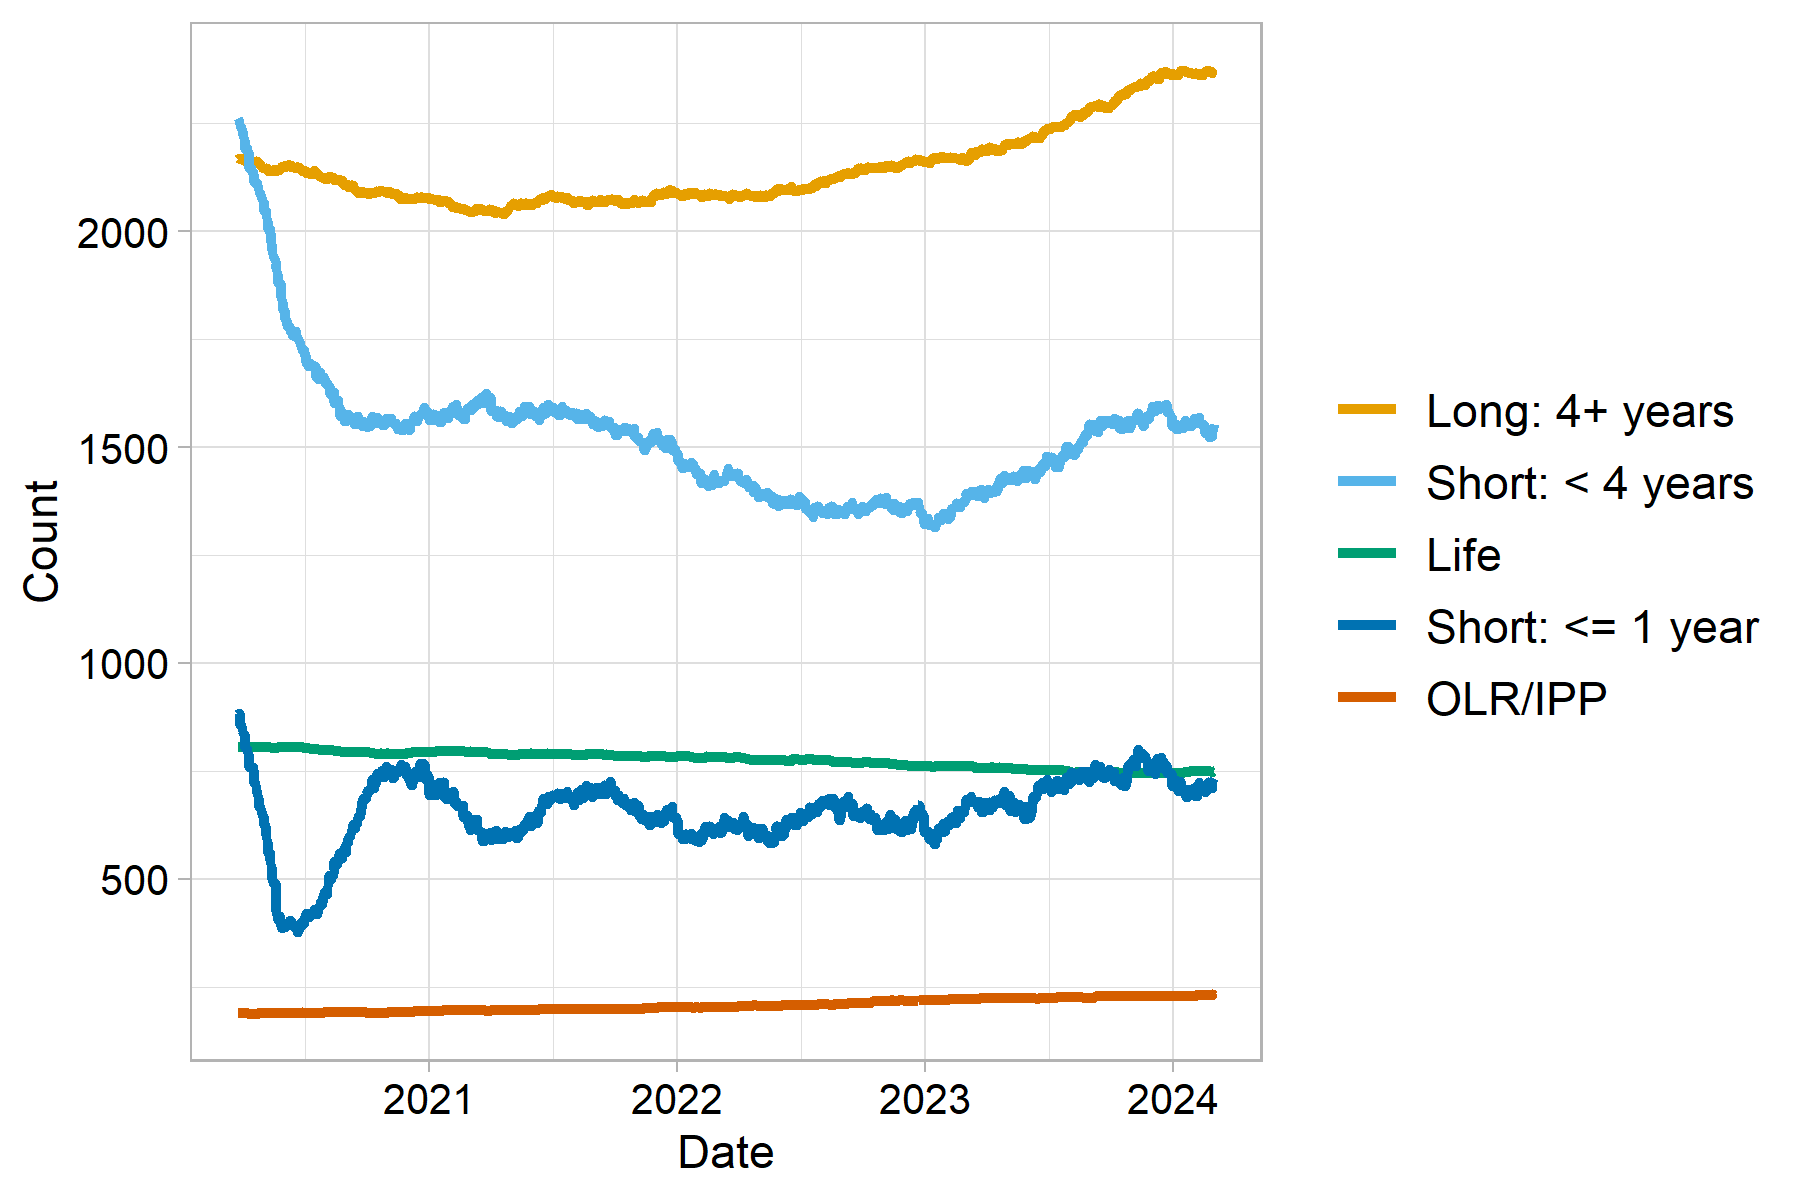 The sentenced population broken into overall sentence bands. The highest line to lowest line categories Long: 4 years plus (highest line), Short: less that 4 years, Life, Short: one year or less, Orders of Lifelong Restriction (lowest line). The trends are described in the body text. Last updated March 2024. Next update due April 2024.